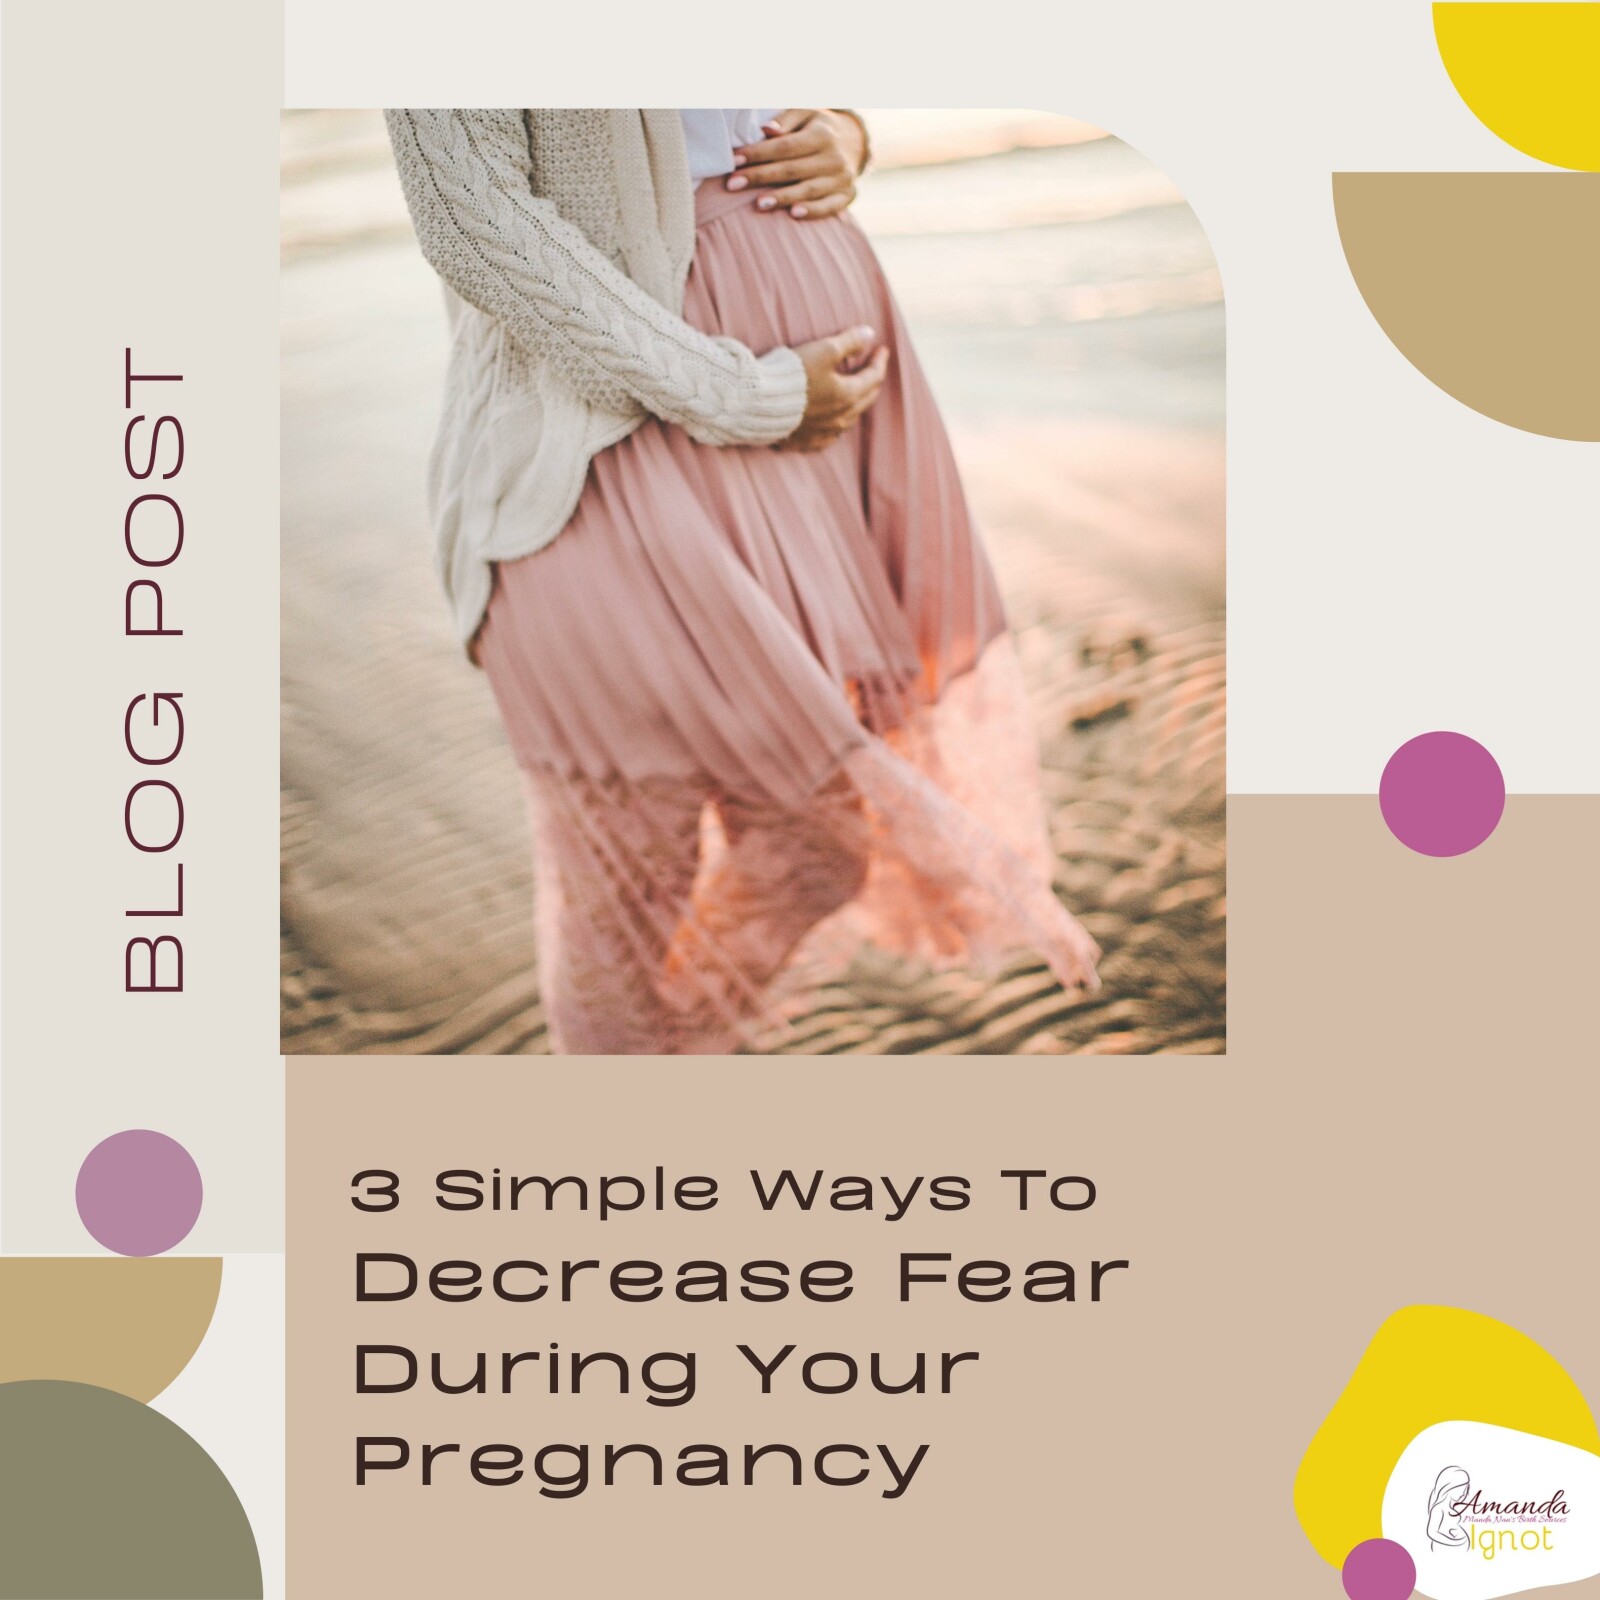 3 Simple Ways To Decrease Fear During Your Pregnancy